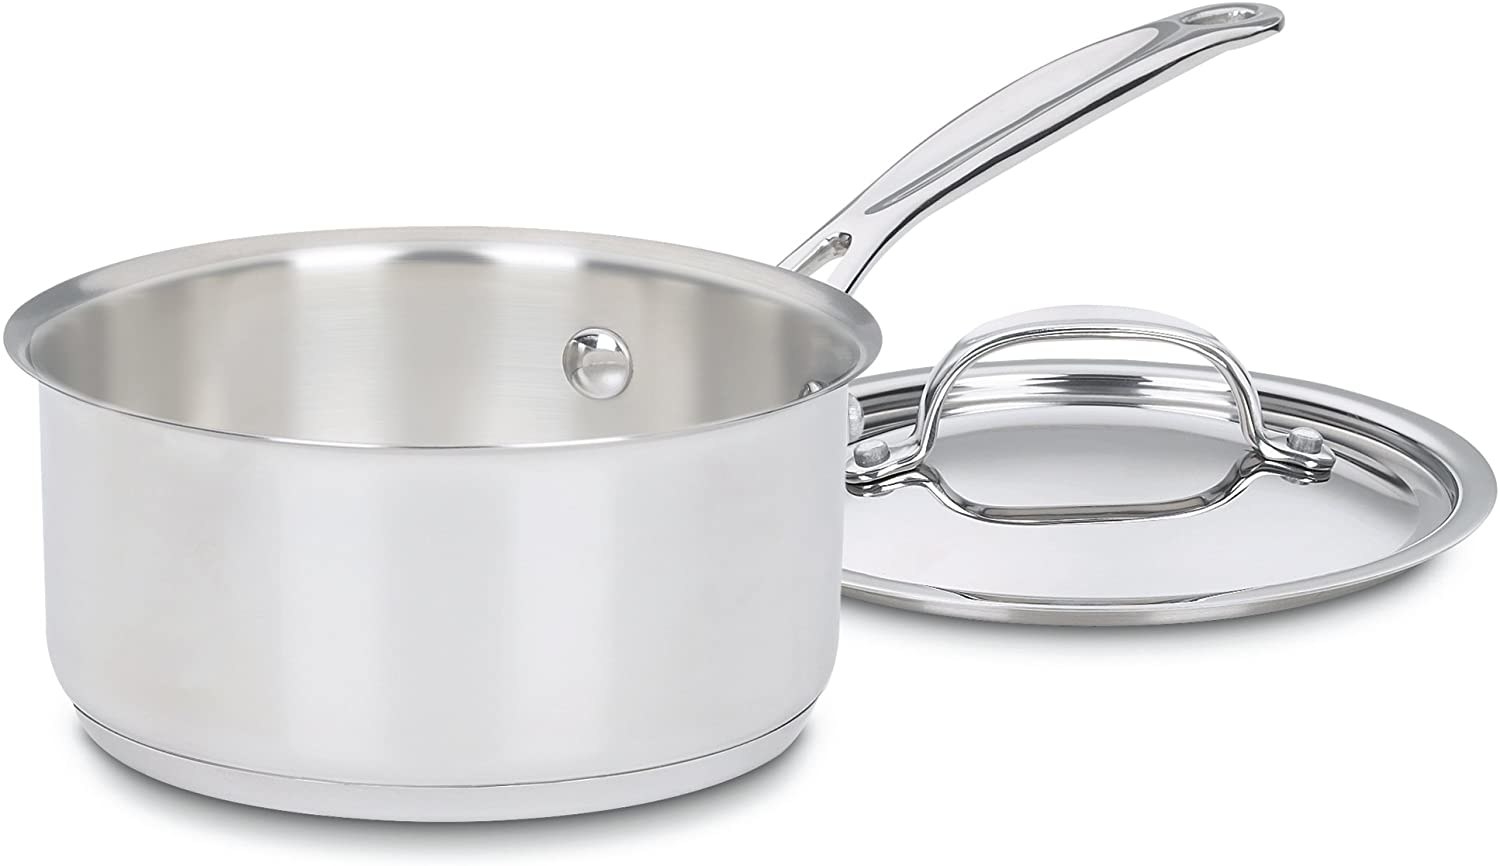 Stainless steel pot with lid